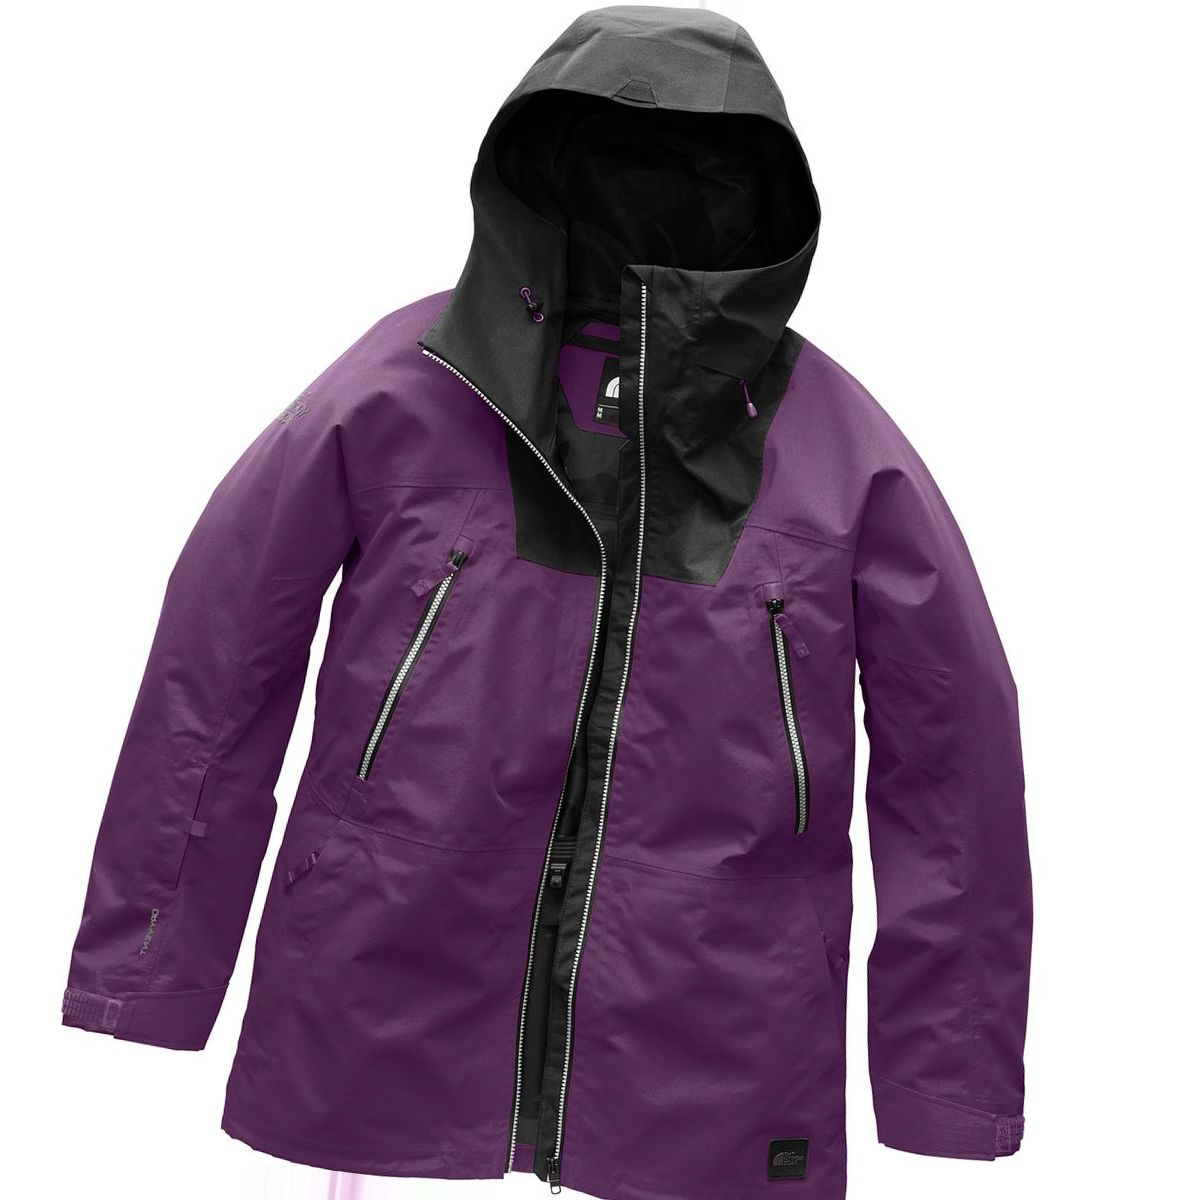 The North Face Ceptor Hooded Jacket - Men's